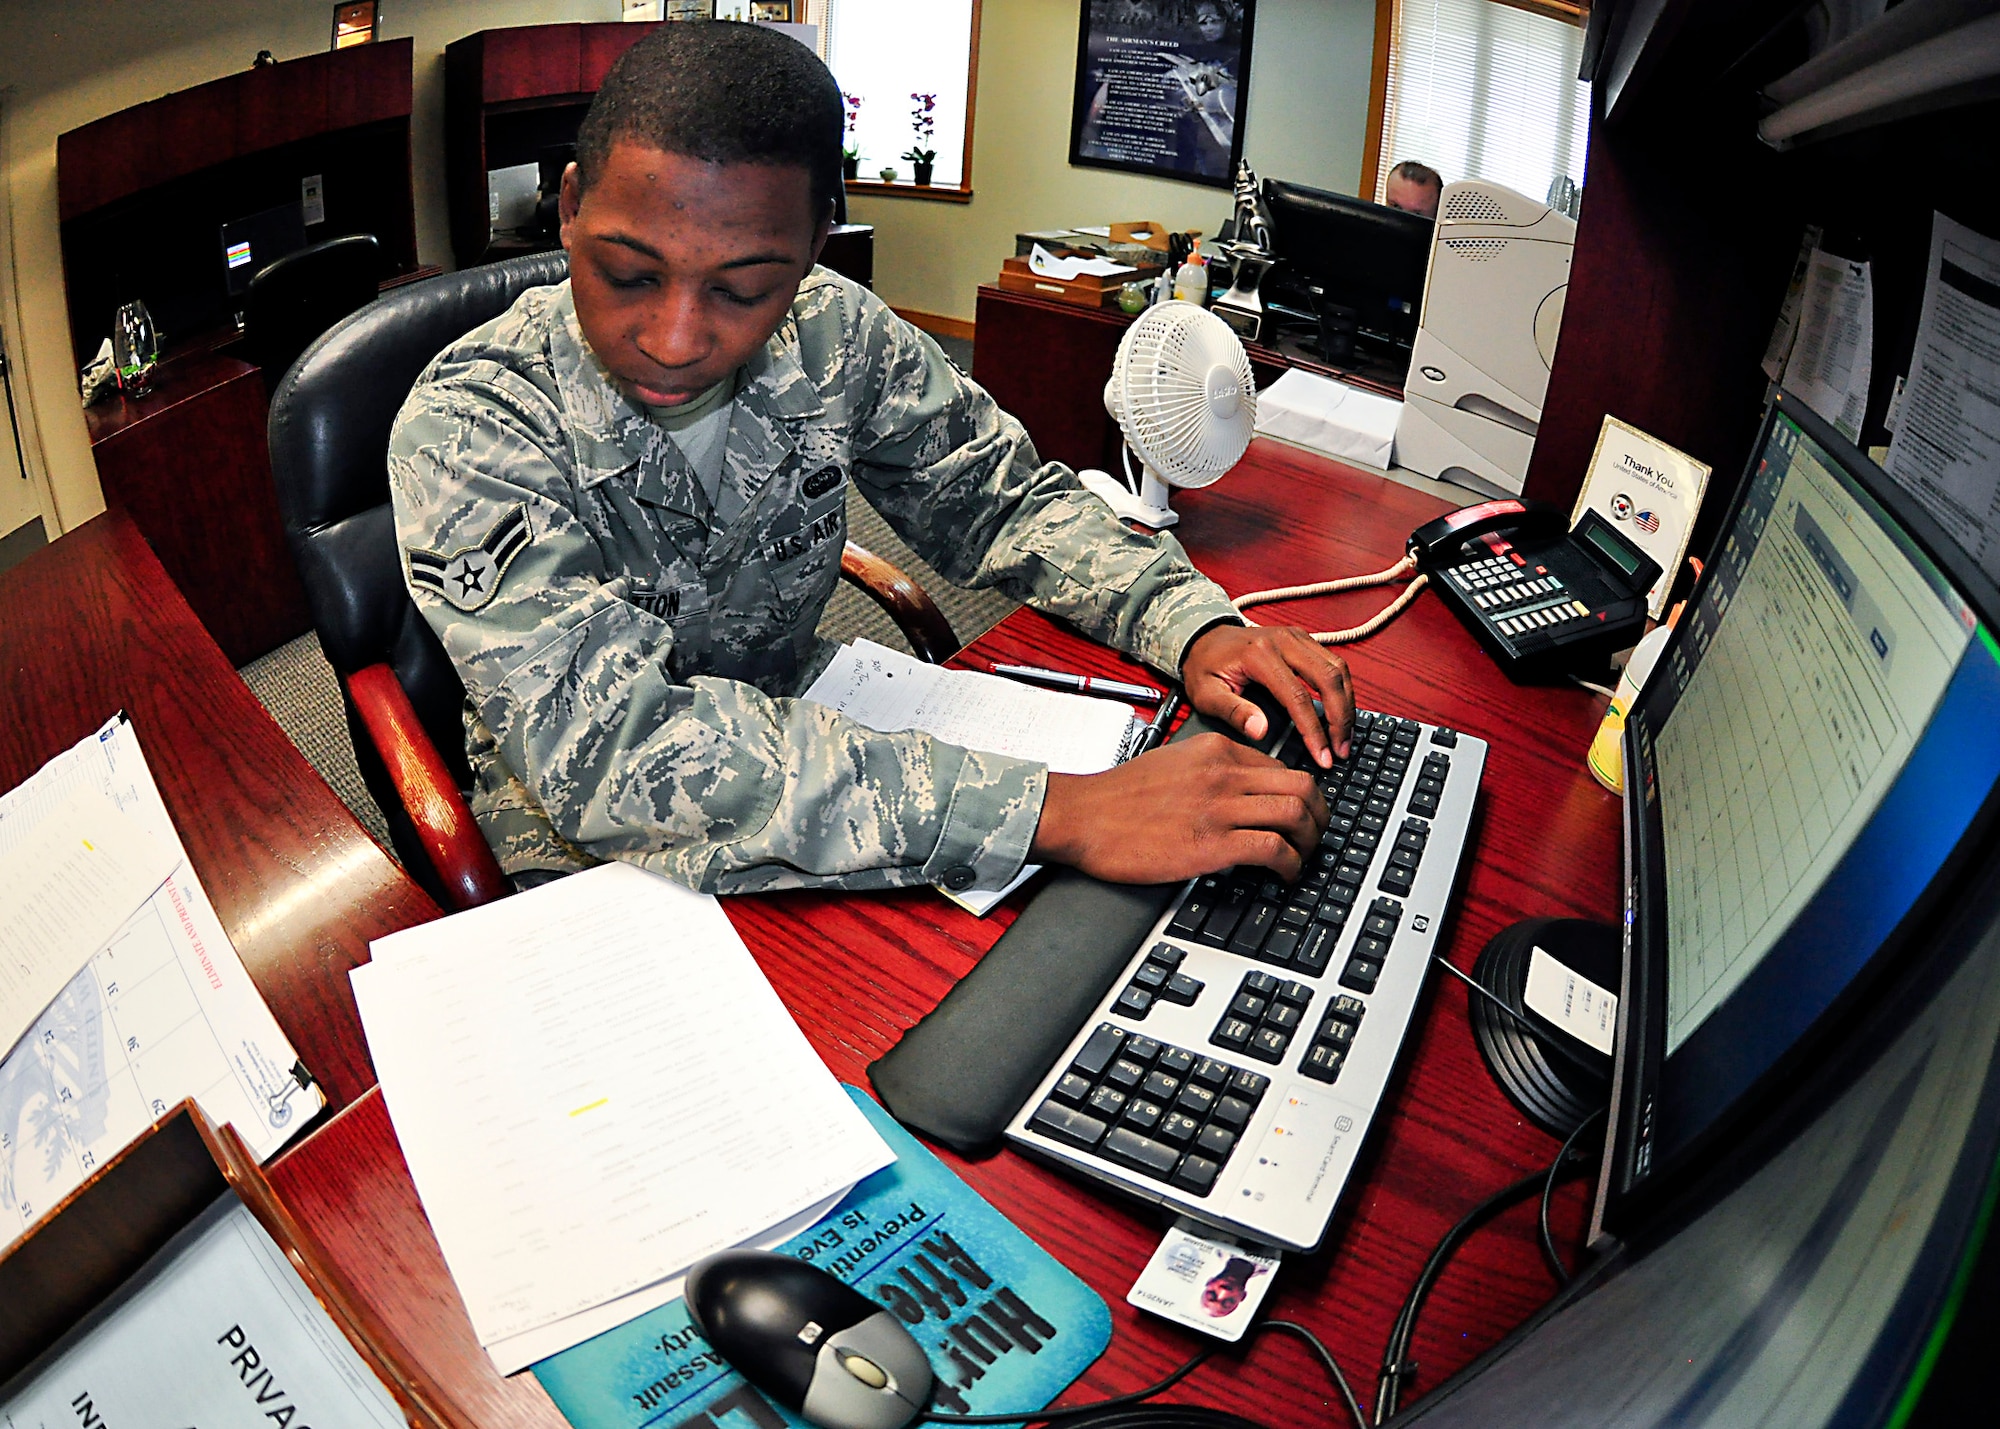 Airman 1st Class Mark Patton, 51st Fighter Wing staff, in-processes some paperwork through the 51st FW/CCEA office Aug. 10, 2011. Patton was recently recognized for his hard work and dedication to his job through the Airman Spotlight program. (U.S. Air Force photo/Tech. Sgt. Chad Thompson)